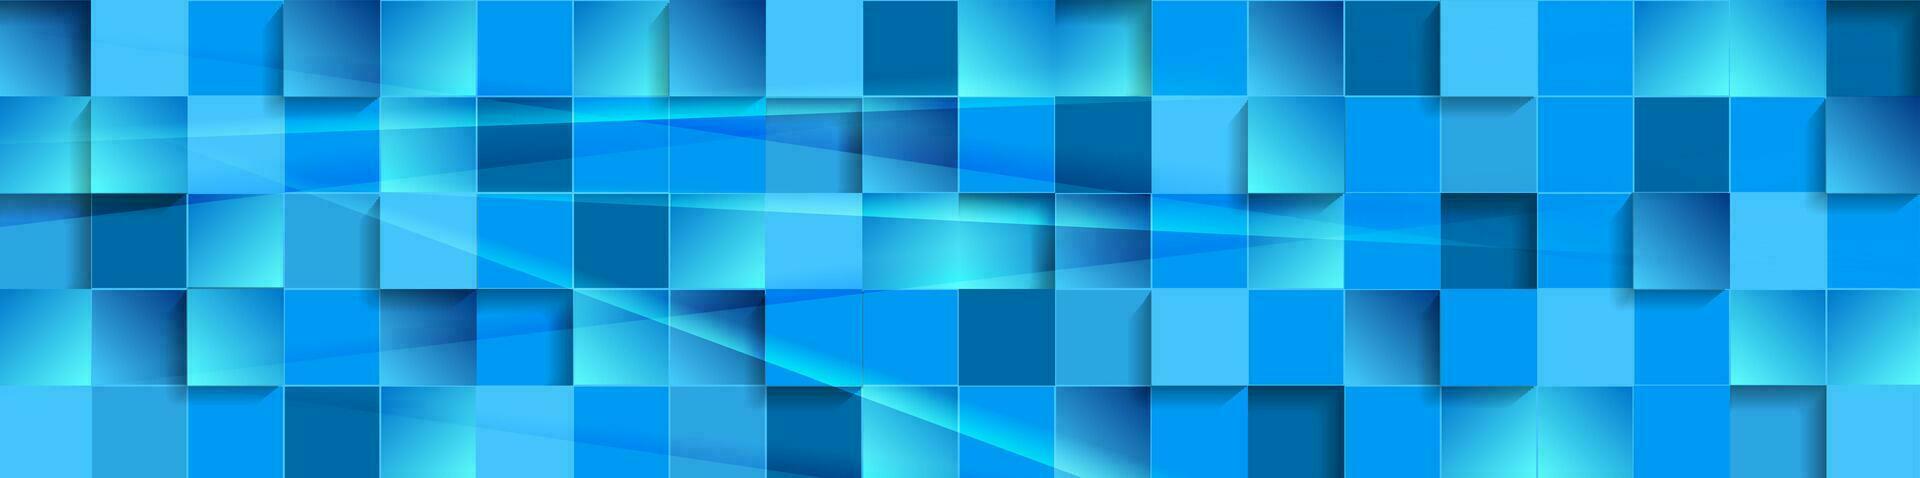 Abstract tech banner with blue glossy mosaic squares vector